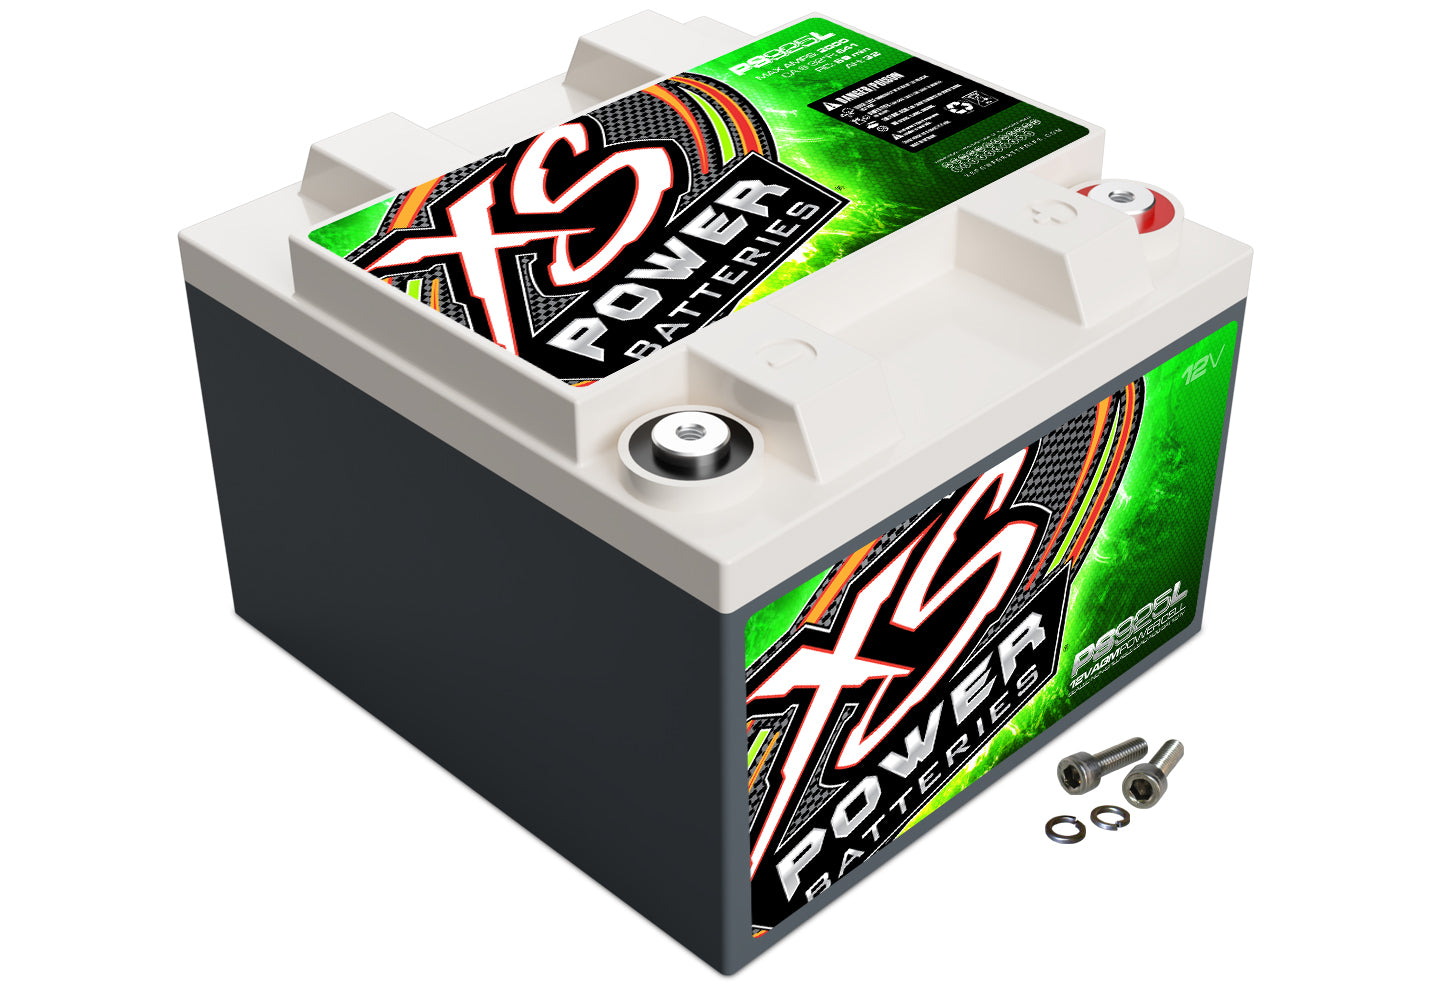 PS925L XS Power 12VDC AGM Powersports Battery 2000A 32Ah